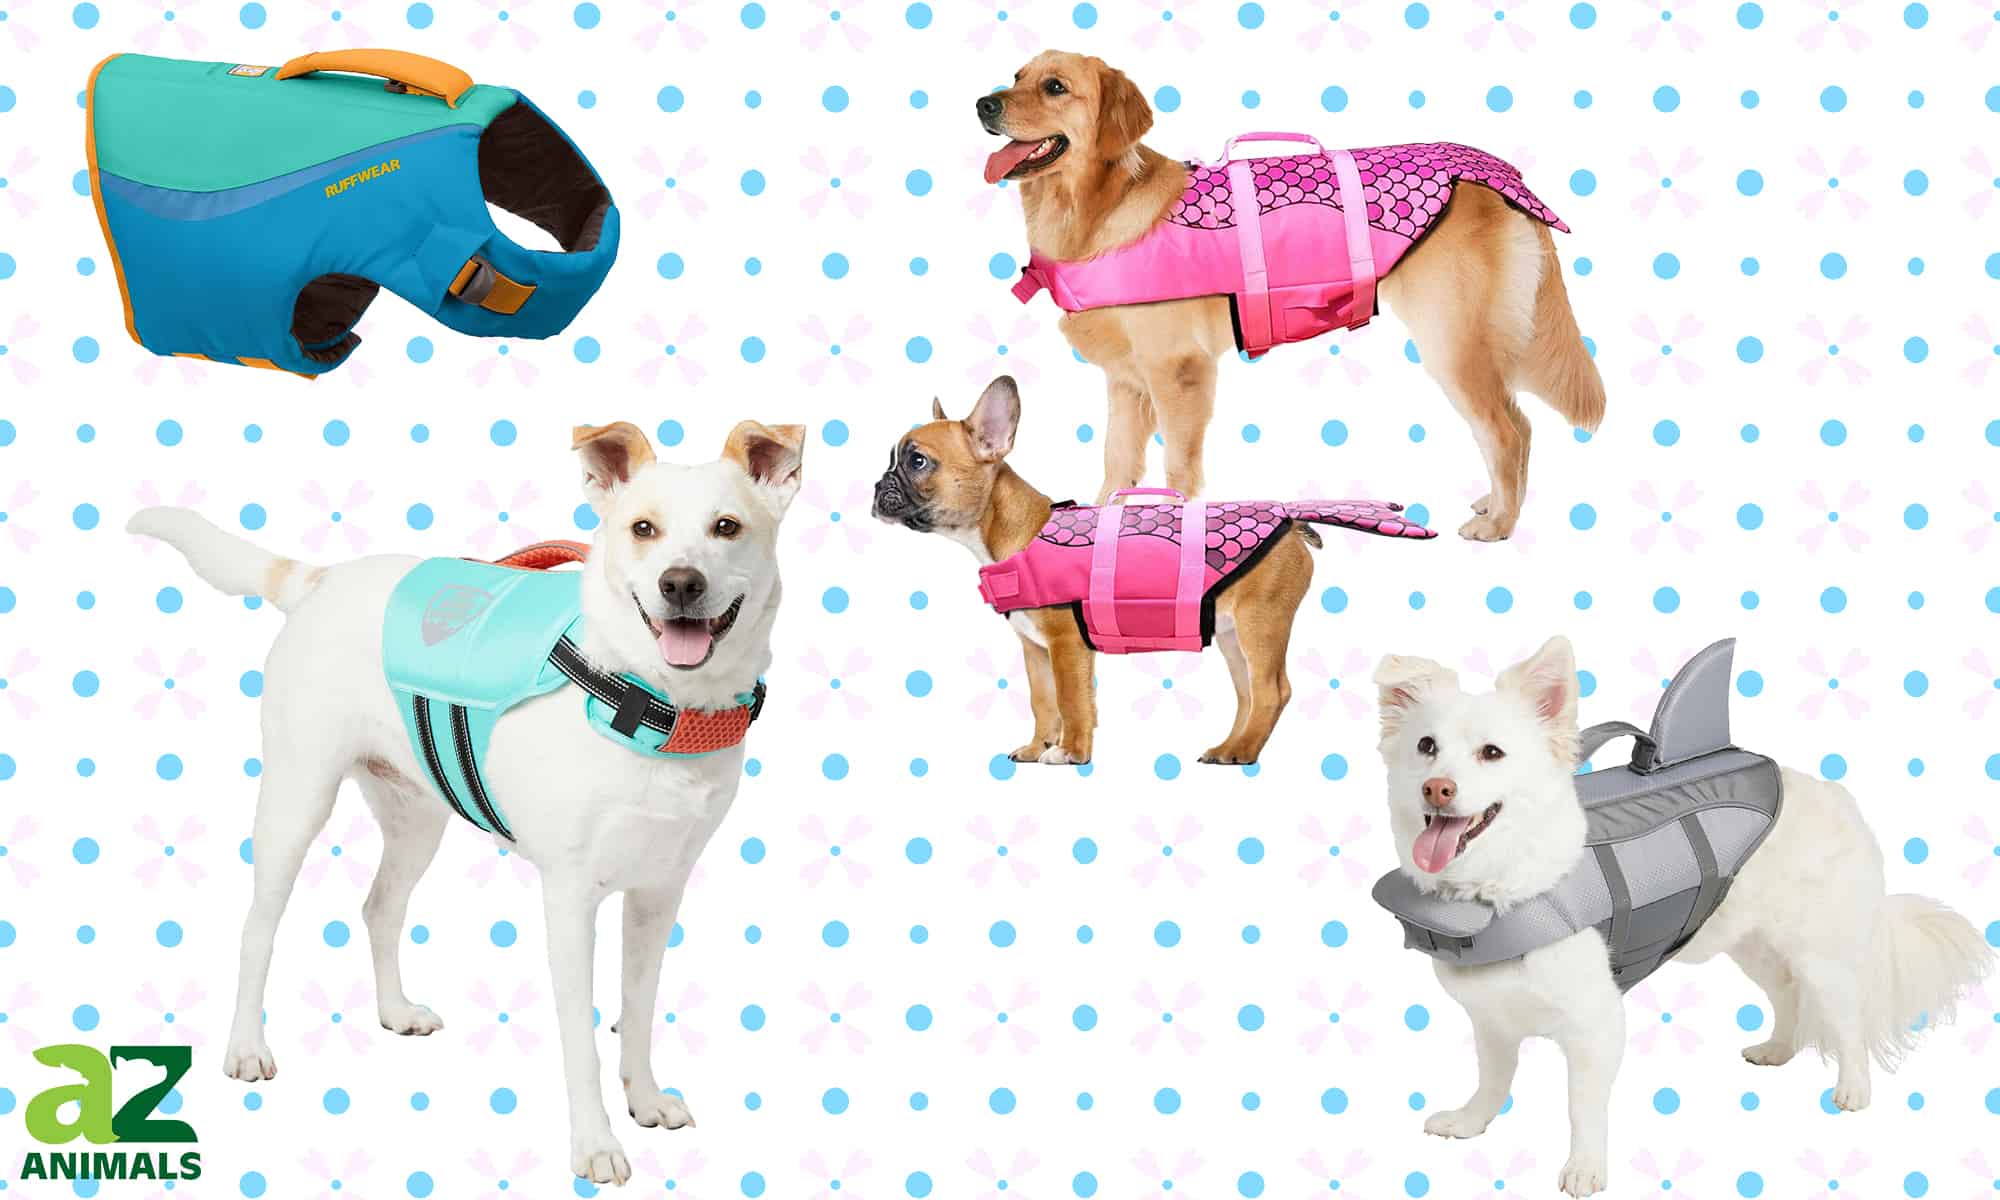 Safe Durable Comfortable Adjustable Preserver with High Buoyancy for Swimming Boating at Pool Beach ROZKITCH Dog Life Jacket Blue Ripstop Pet Floatation Angel Life Vest for Small Middle Large Dog 